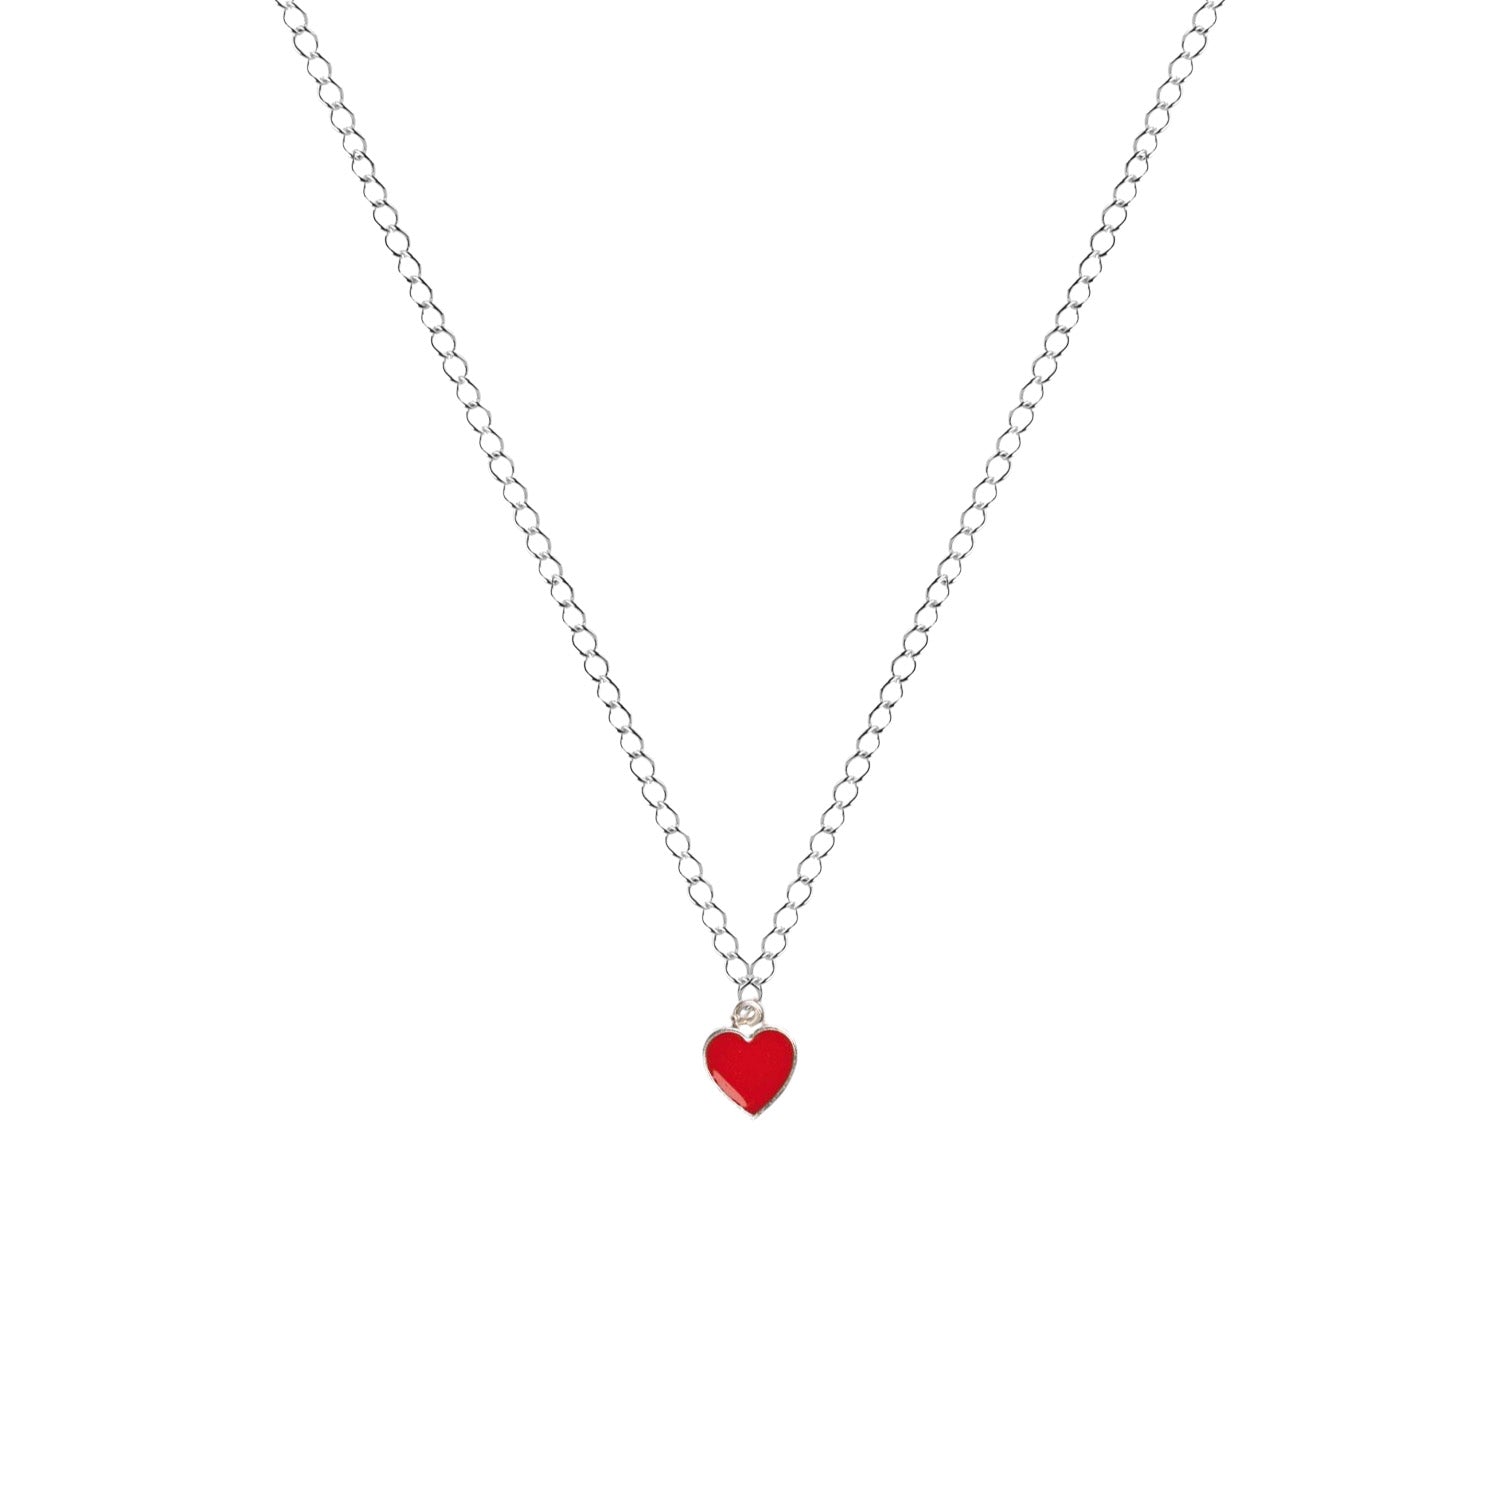 Buy Dainty Red Queen of Hearts Necklace Online in India - Etsy